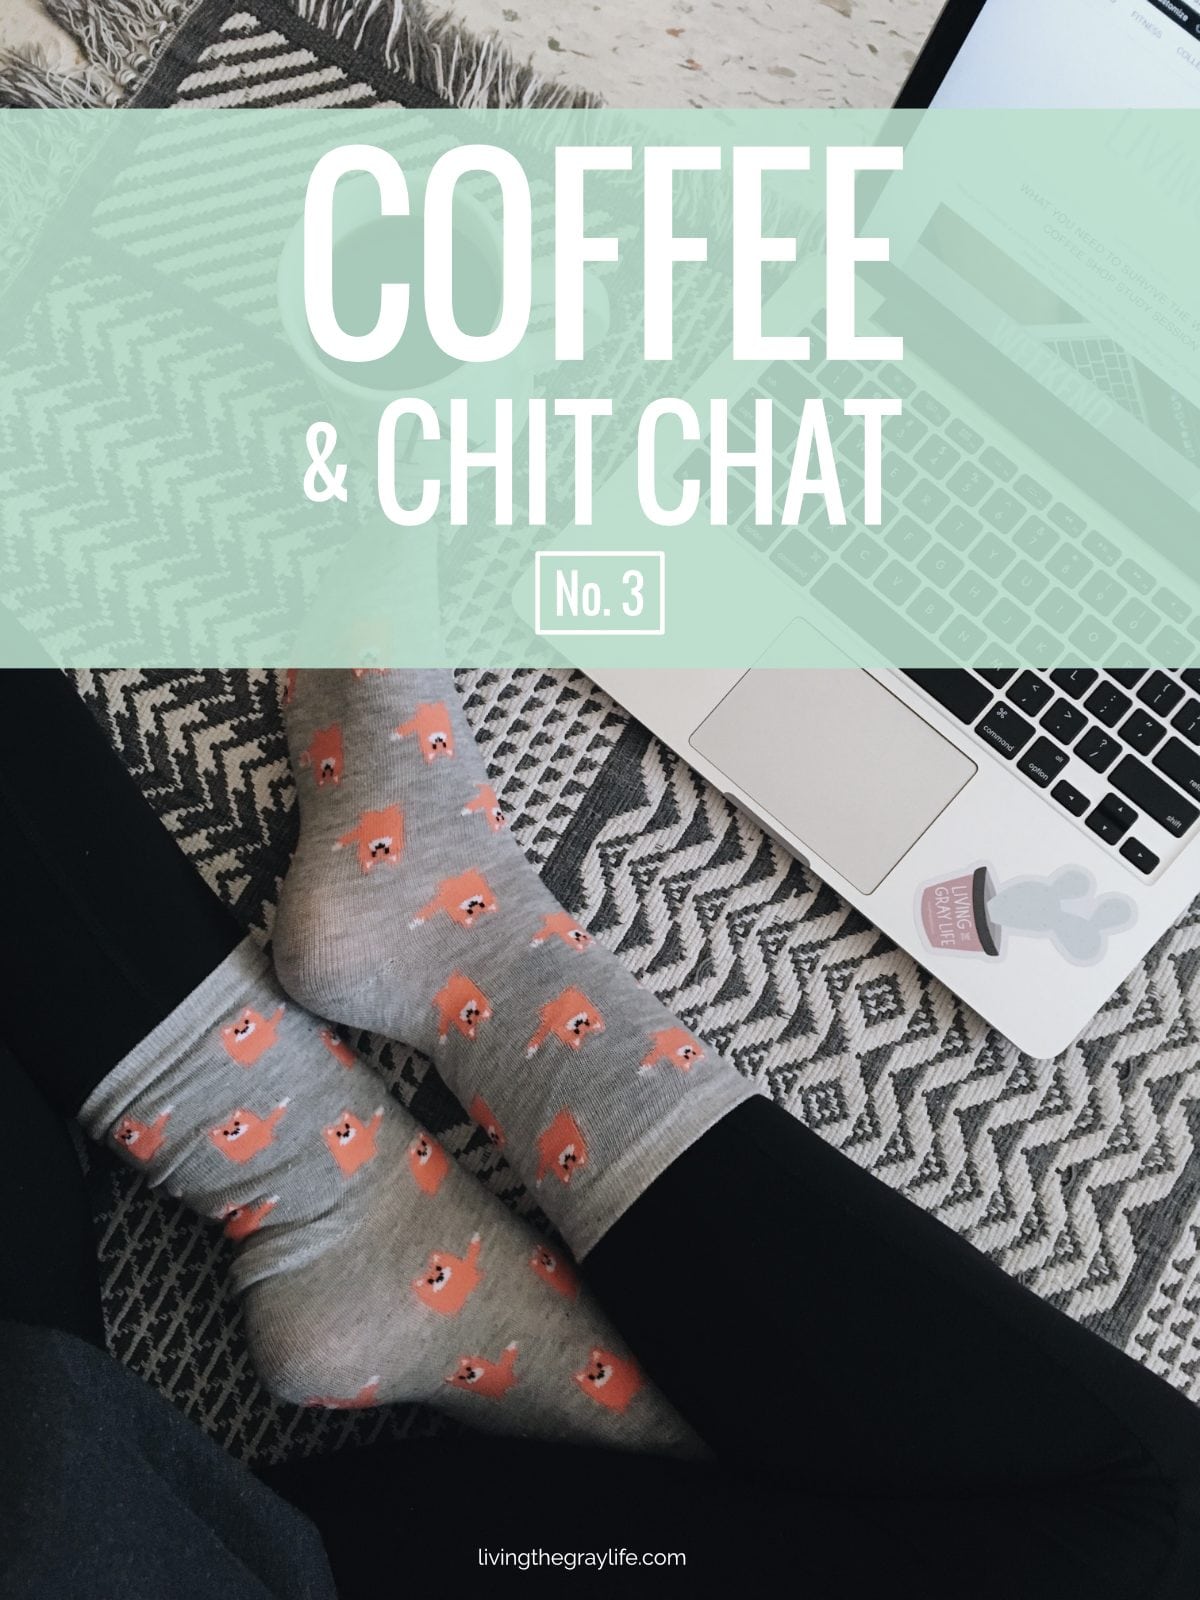 Coffee & Chit Chat No. 3